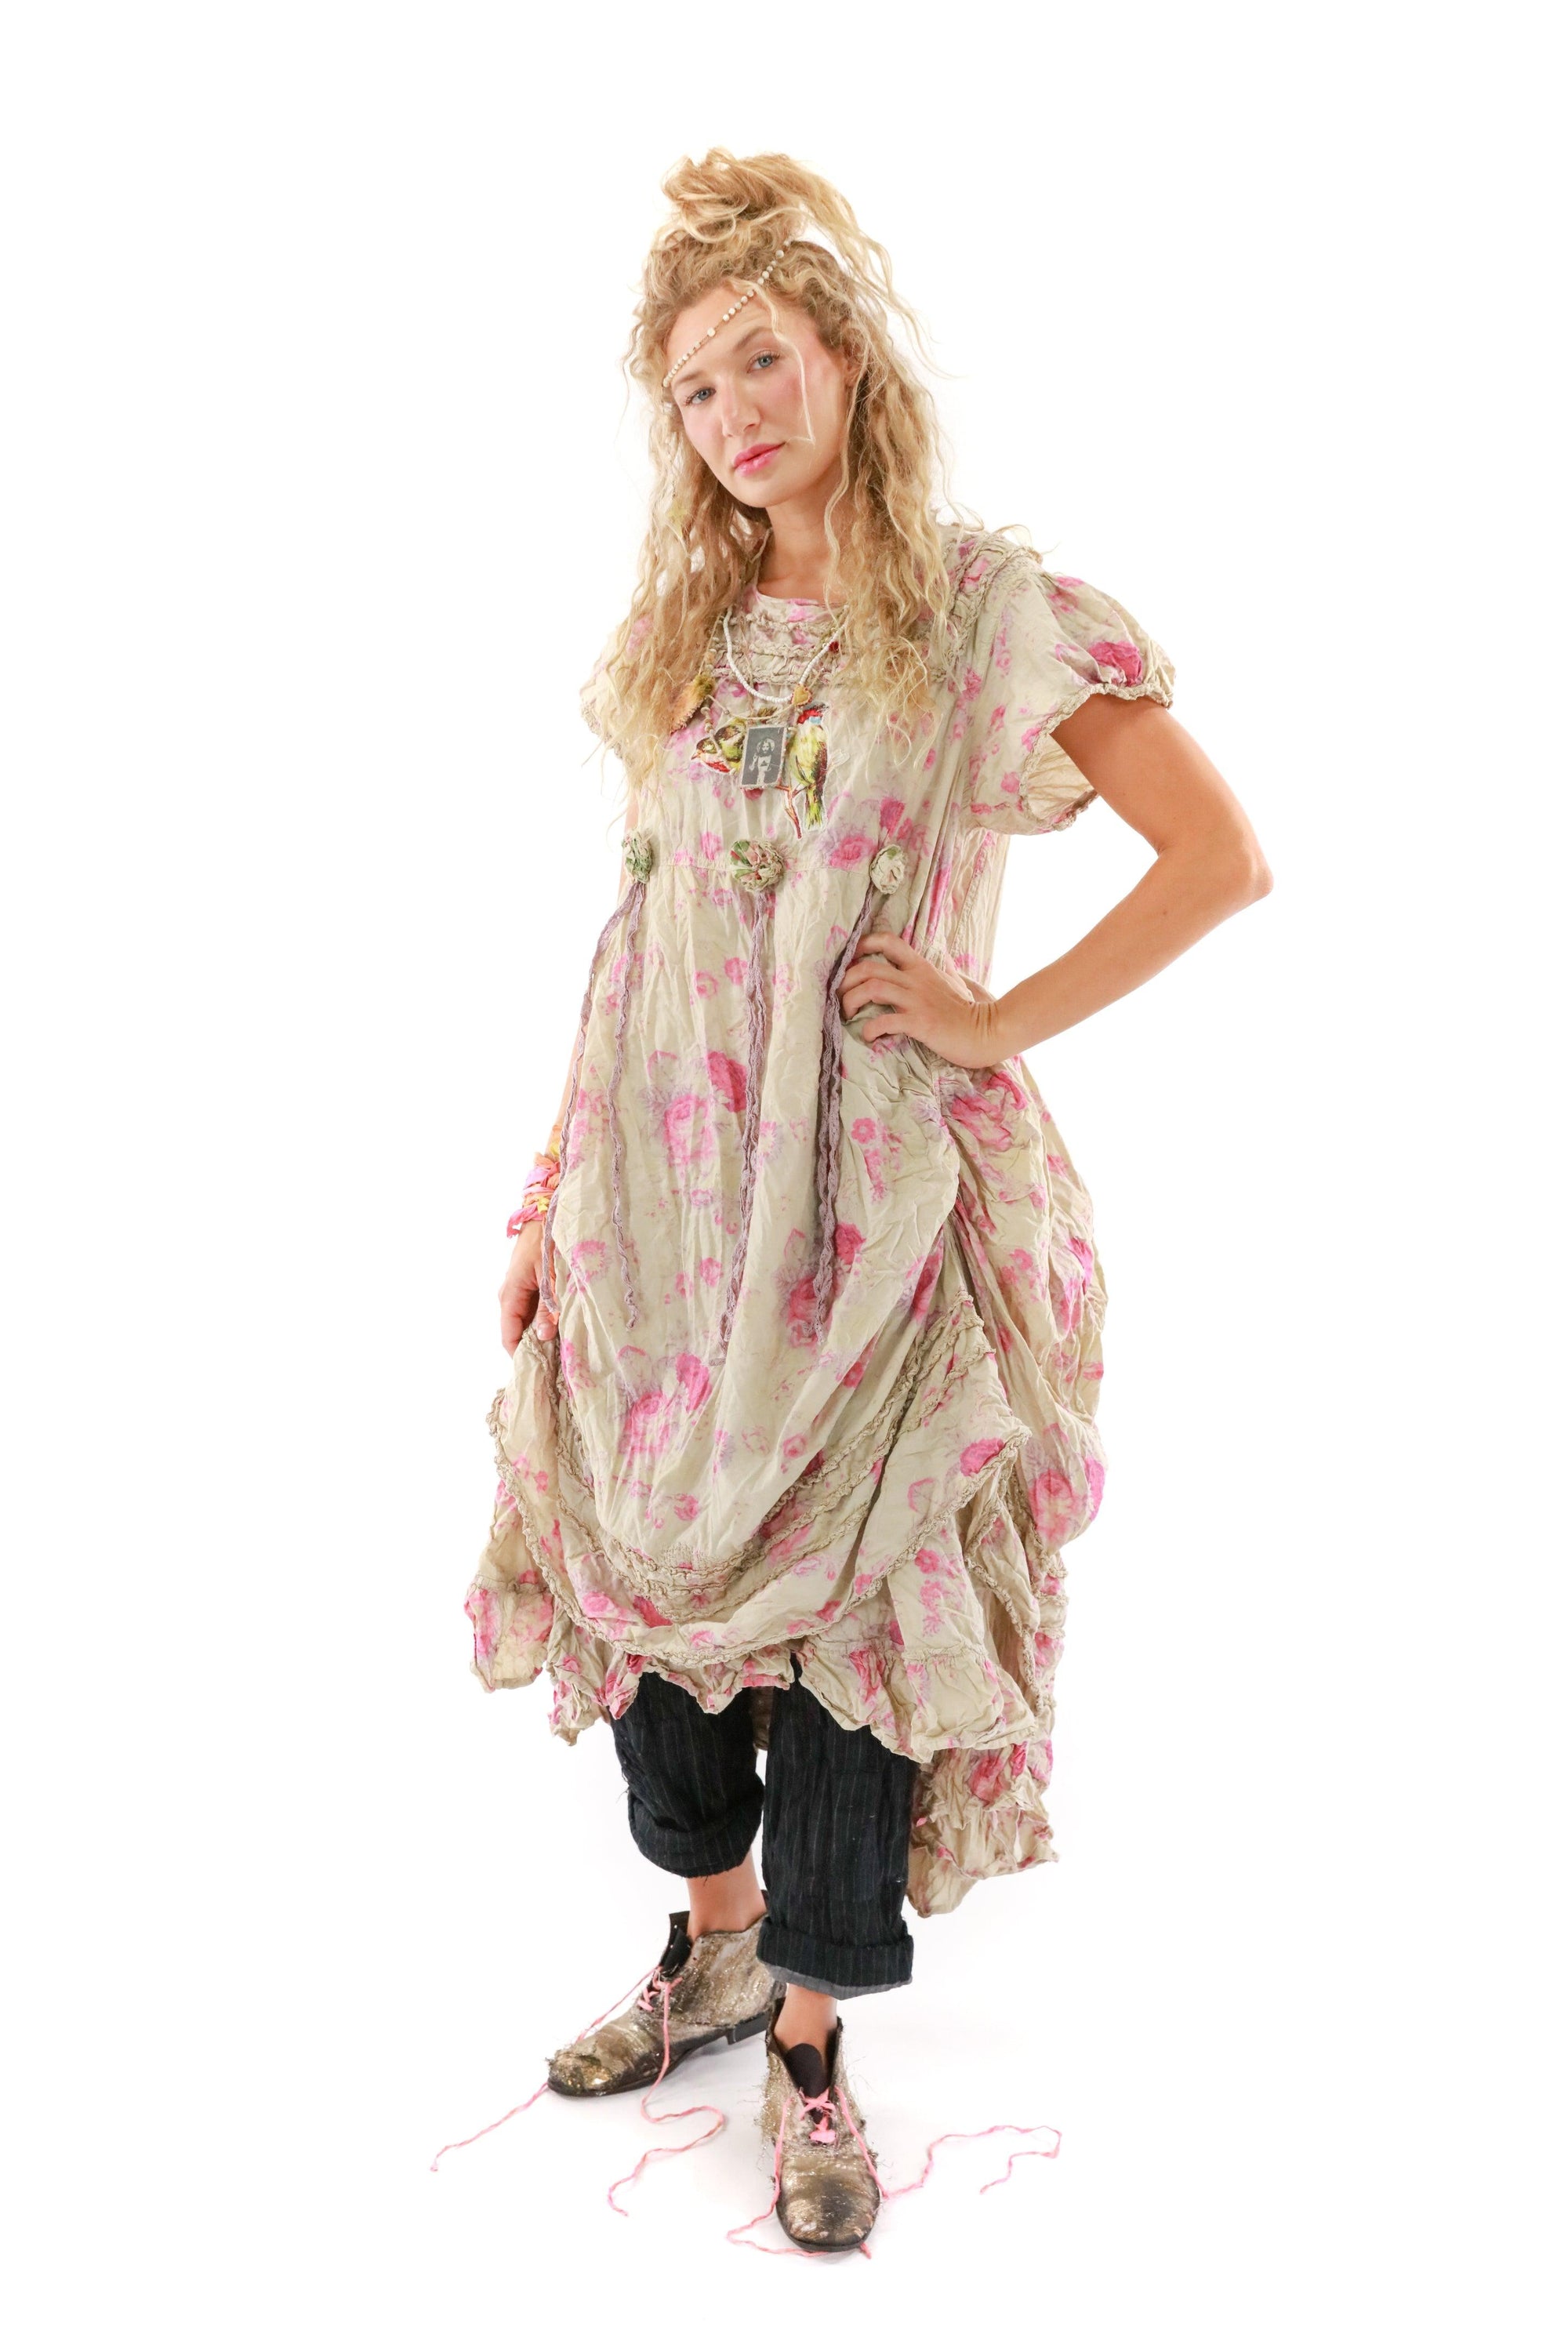 Jovenelle Gather Dress - Magnolia Pearl Clothing